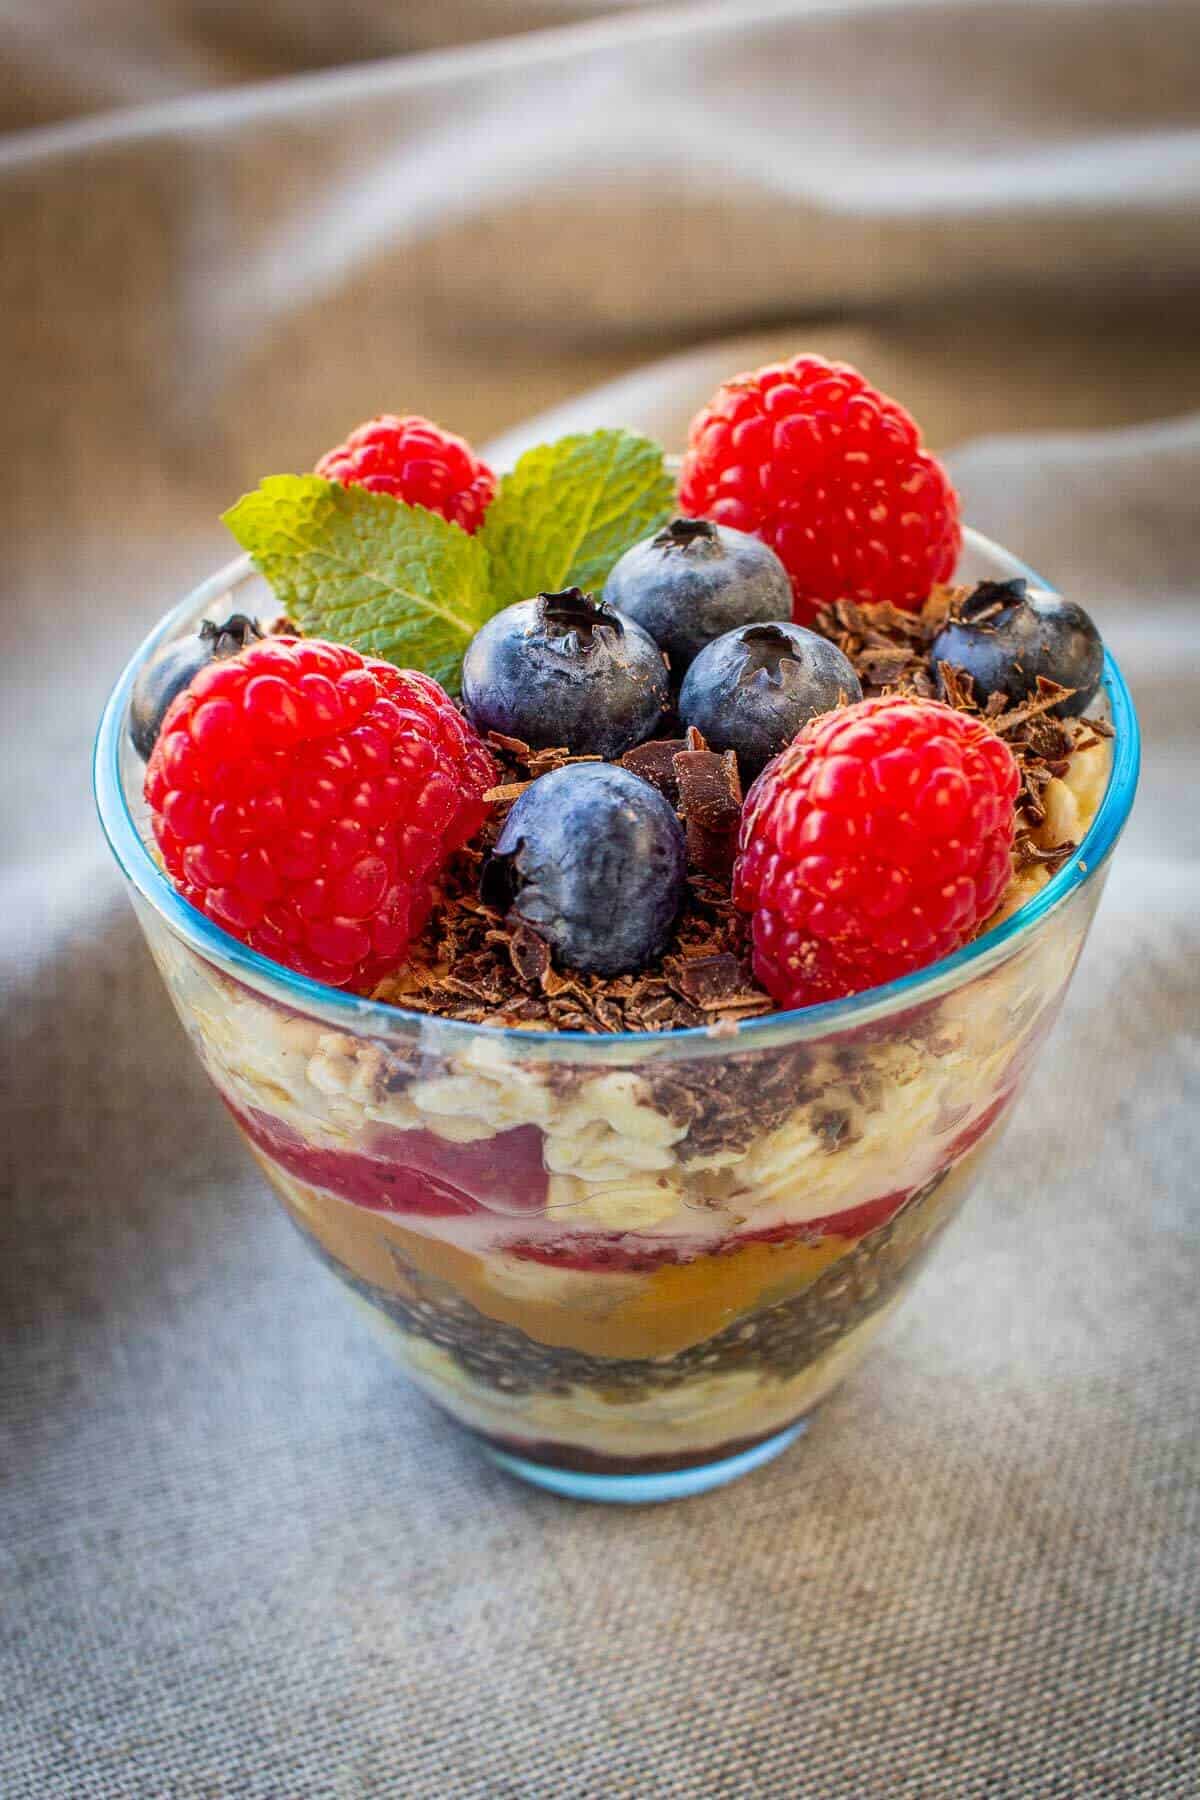 Oats and Chia Pudding